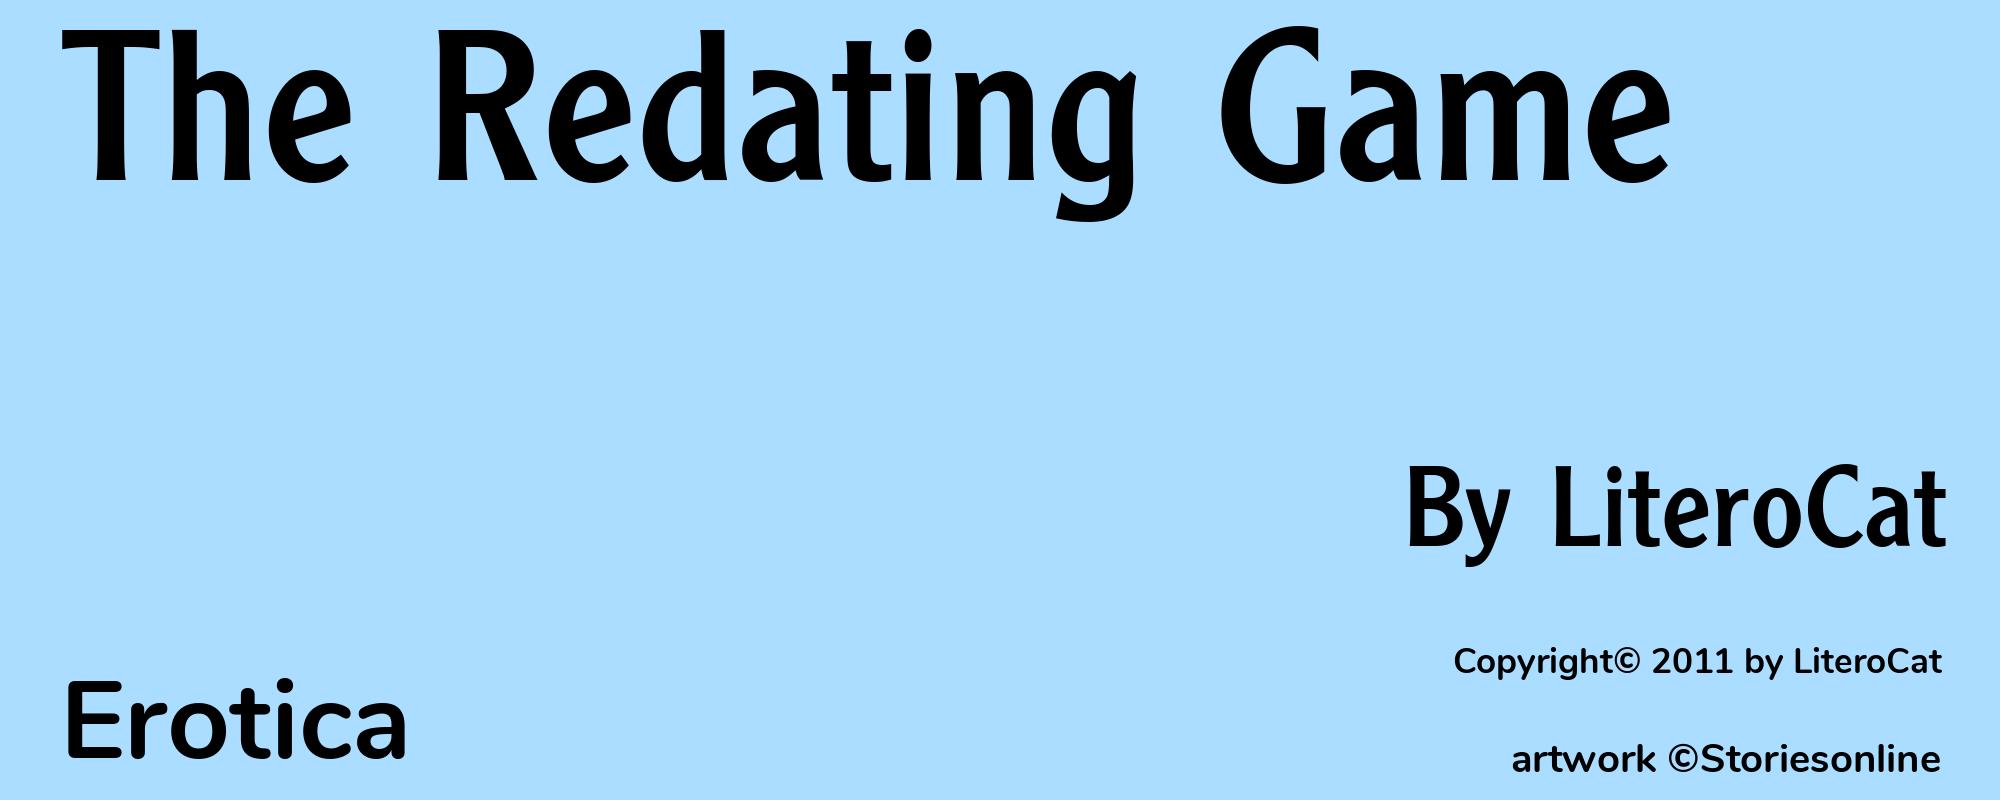 The Redating Game - Cover